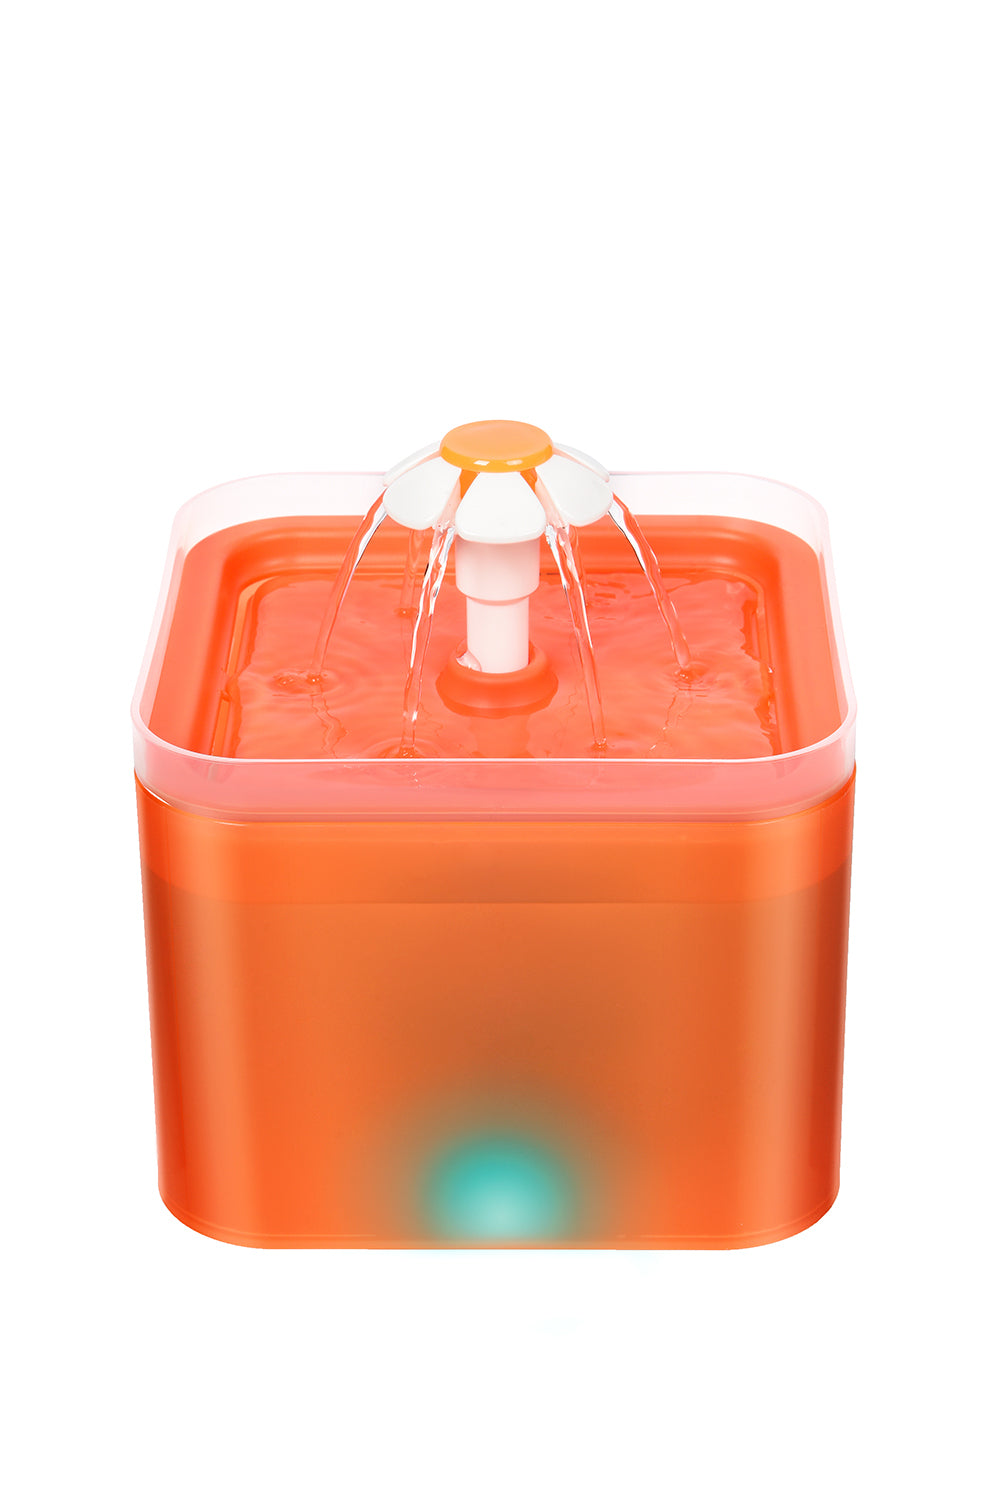 Dog Cat Water Feeder Automatic Electric Pet Water Fountain  Bowl Dispenser W LED Orange